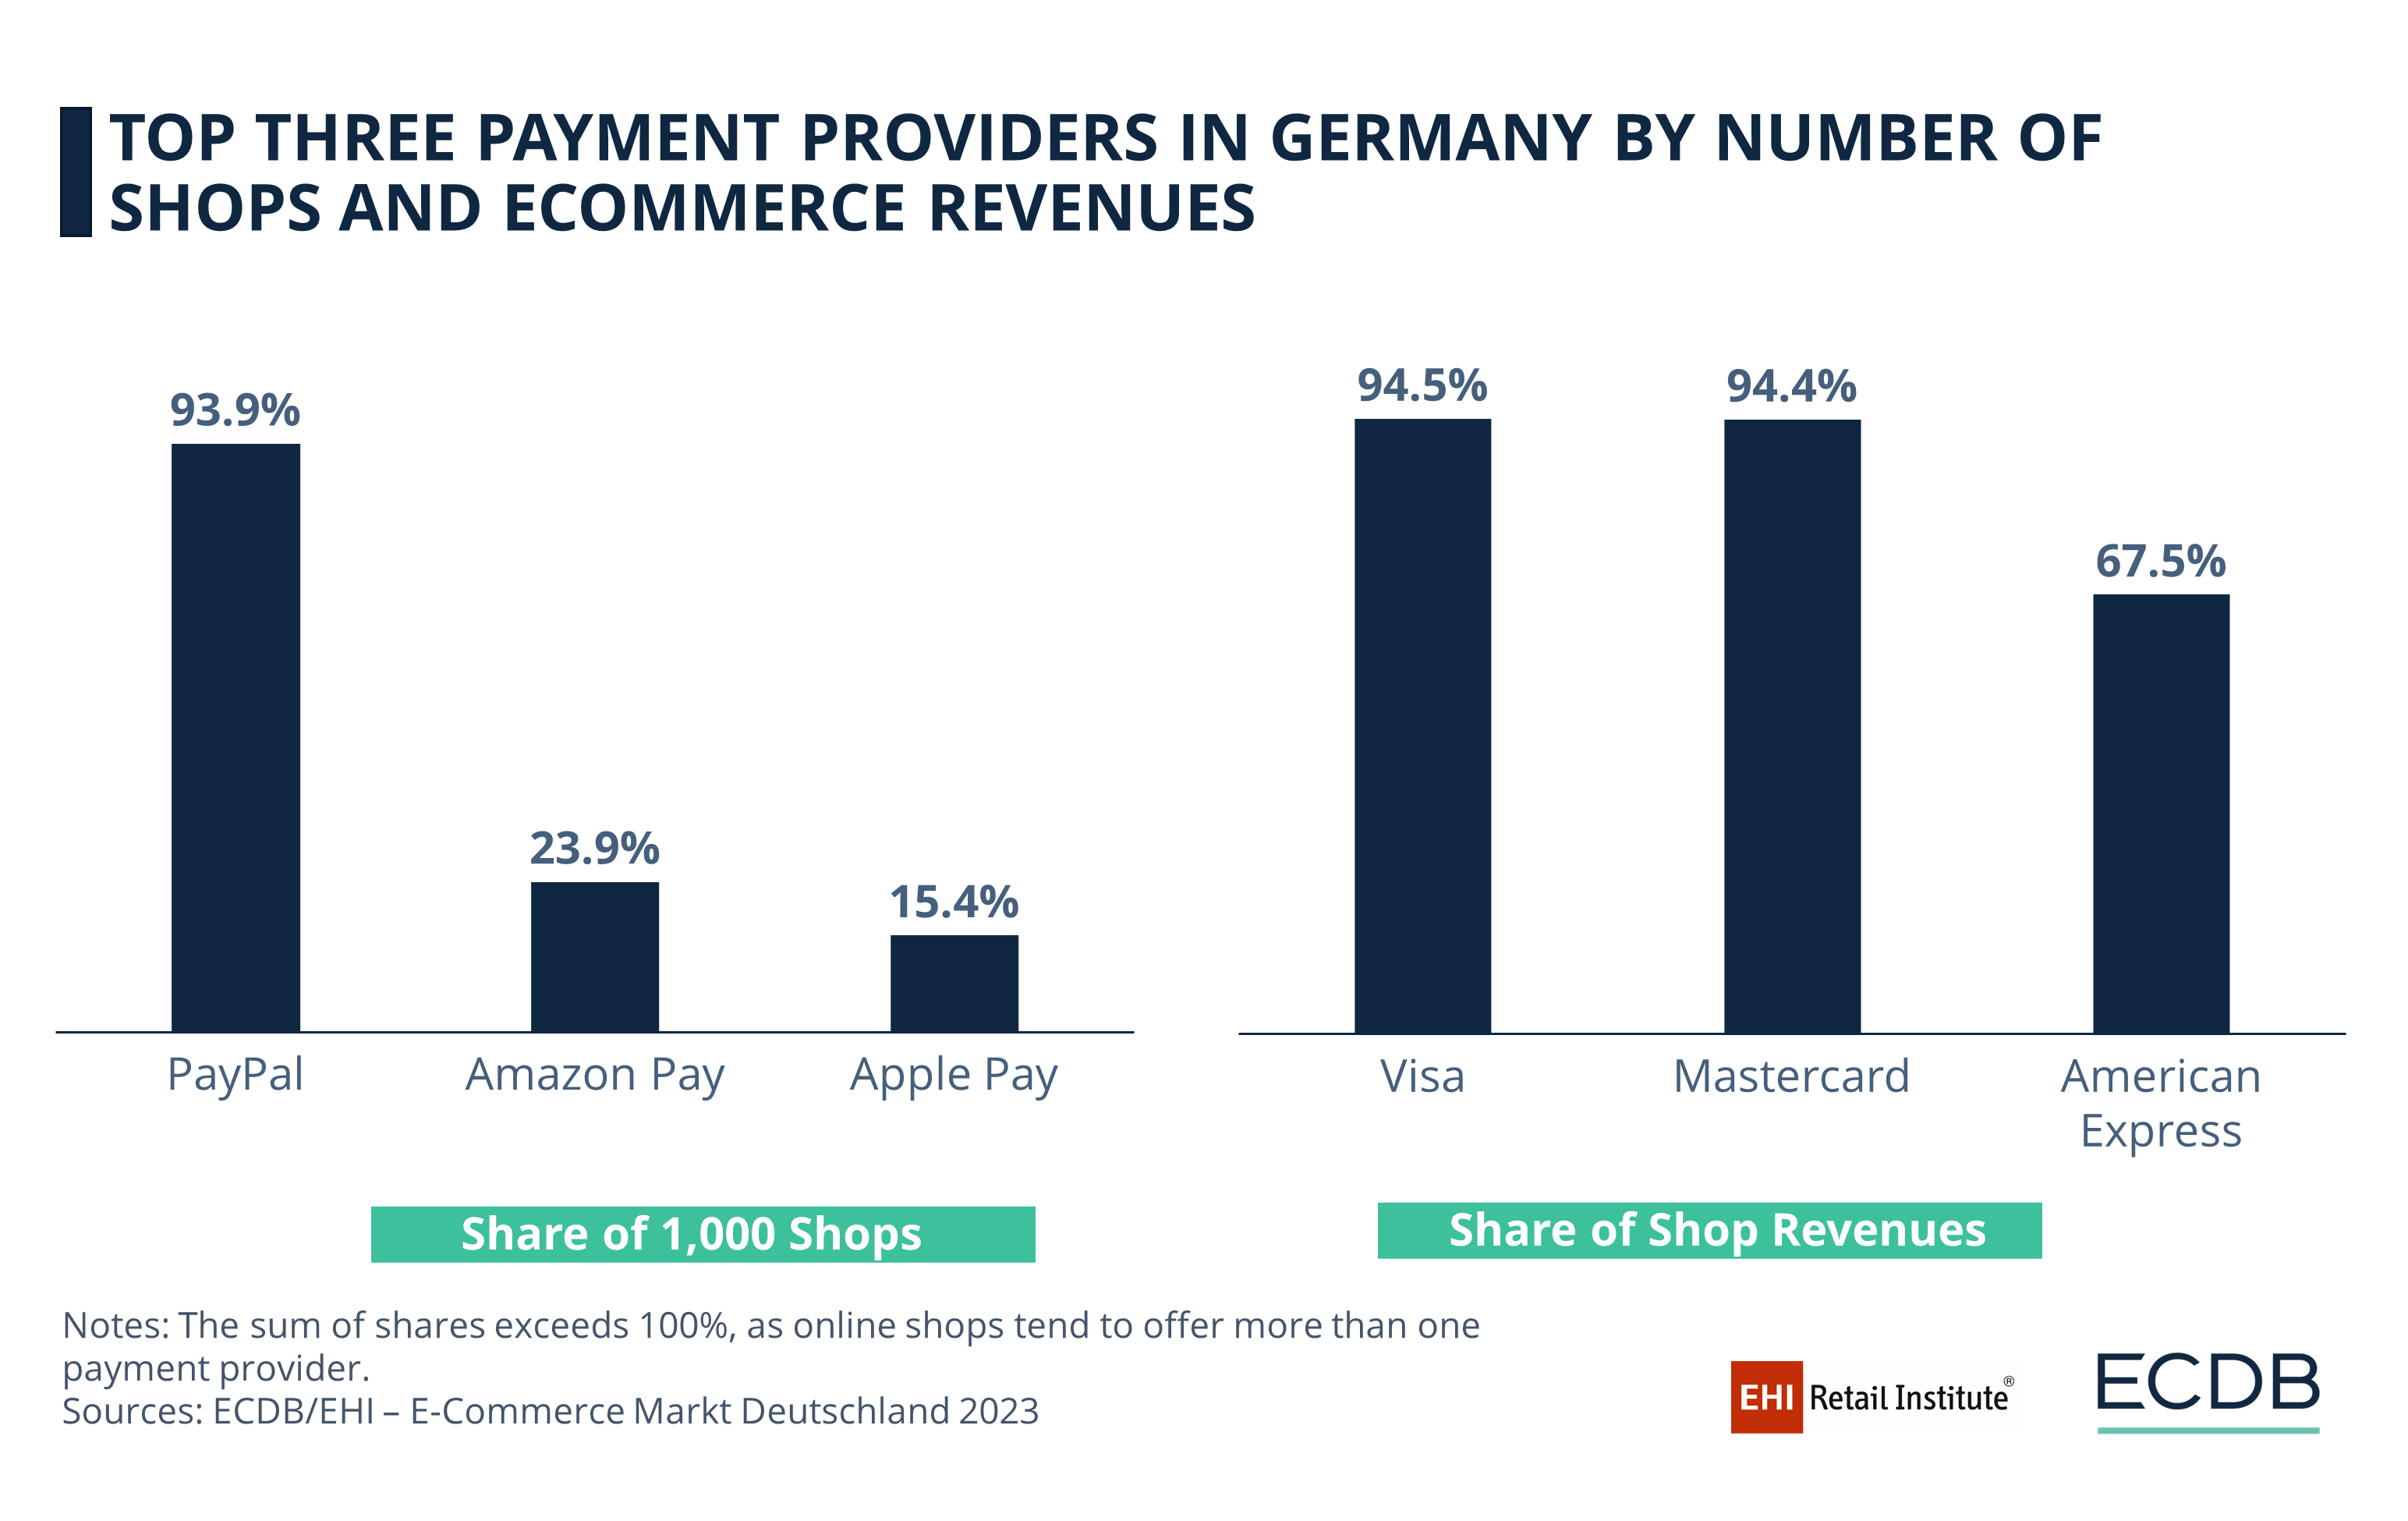 Top Three Payment Providers in Germany by Number of Shops and eCommerce Revenues